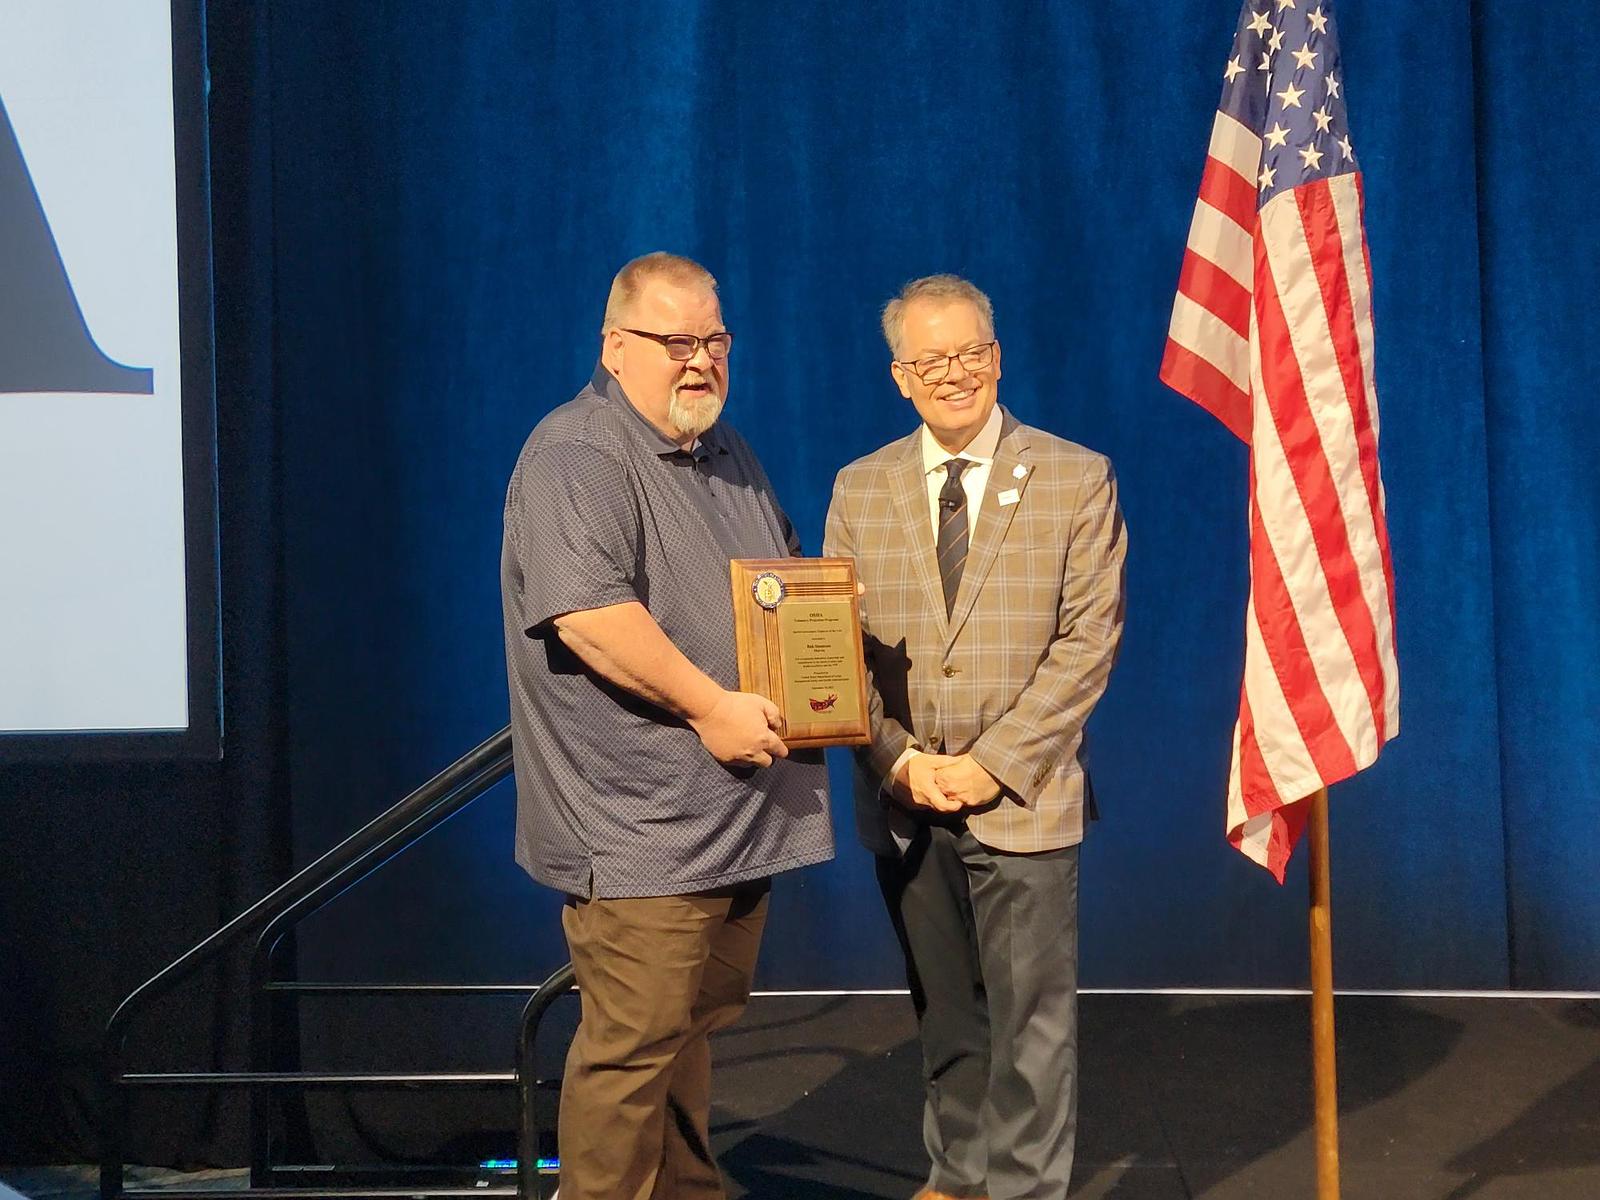 Bob Simmons receiving the Occupational Safety and Health Administration (OSHA) Special Government Employee of the Year Award